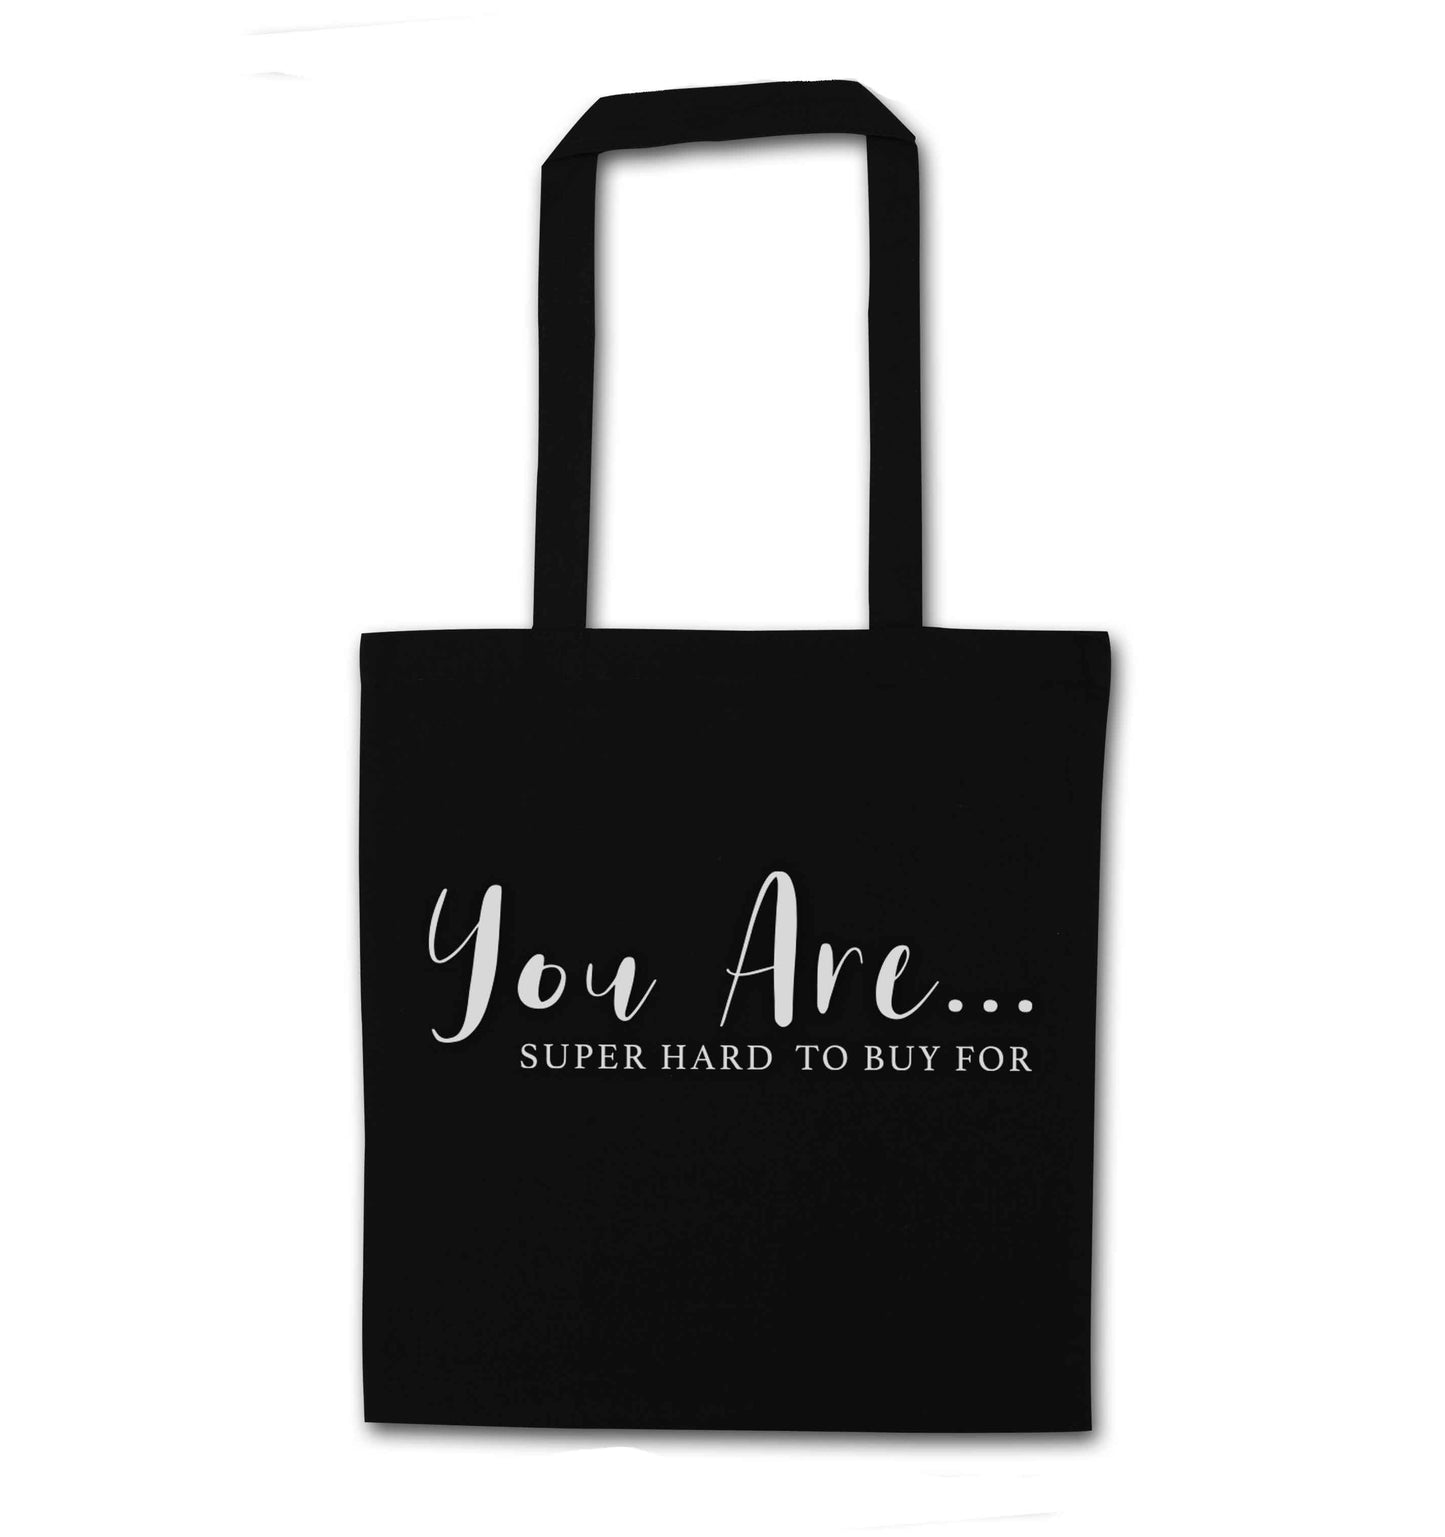 You are super hard to buy for black tote bag